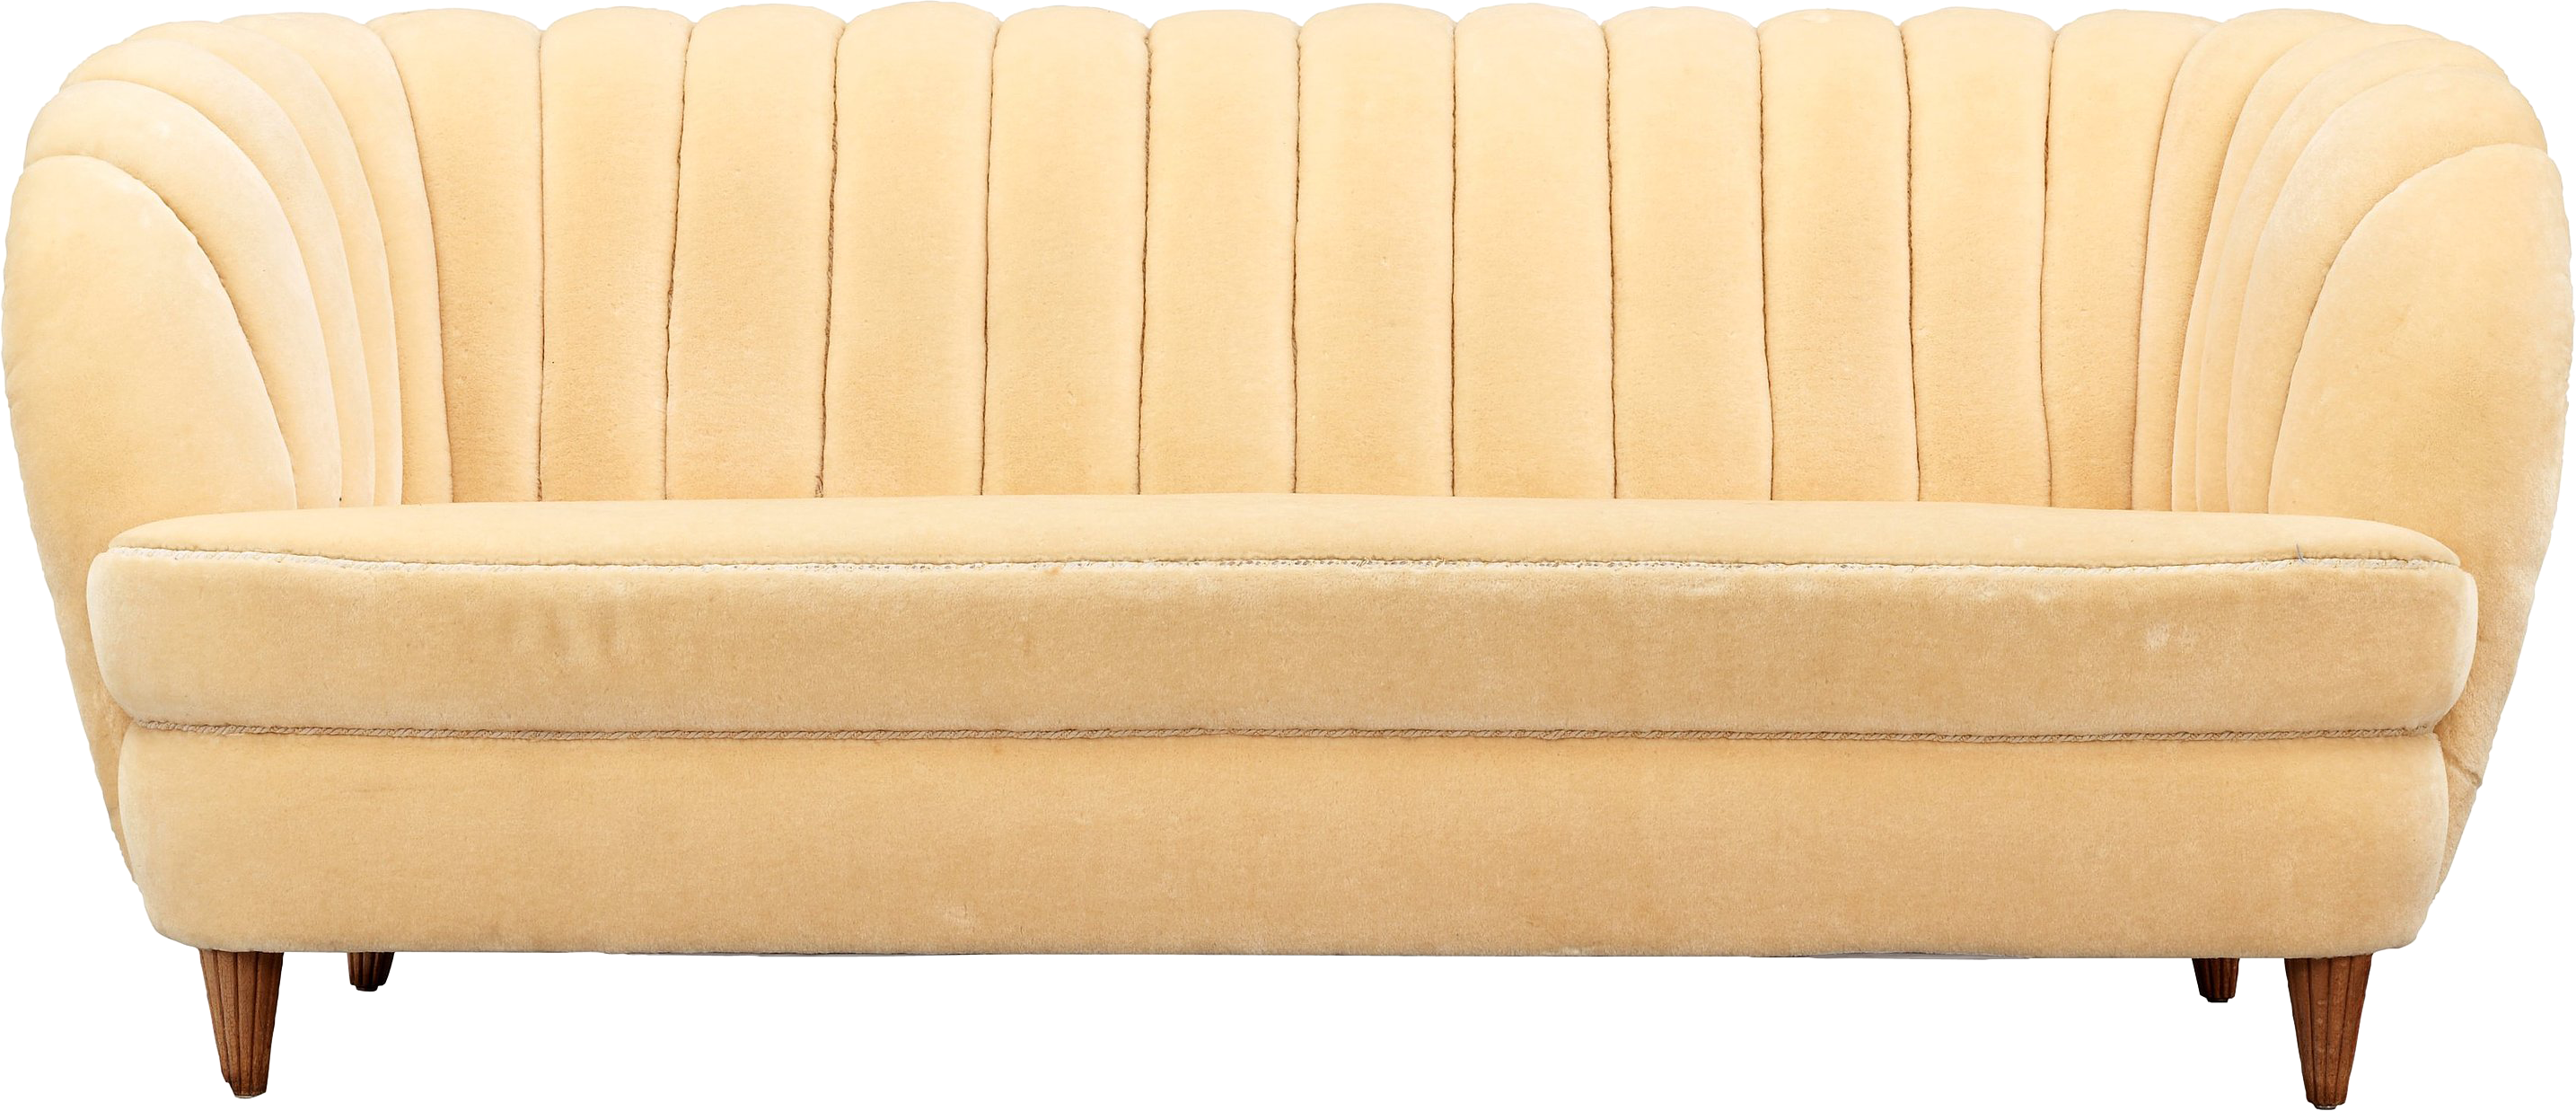 Sofa PNG Clipart Background